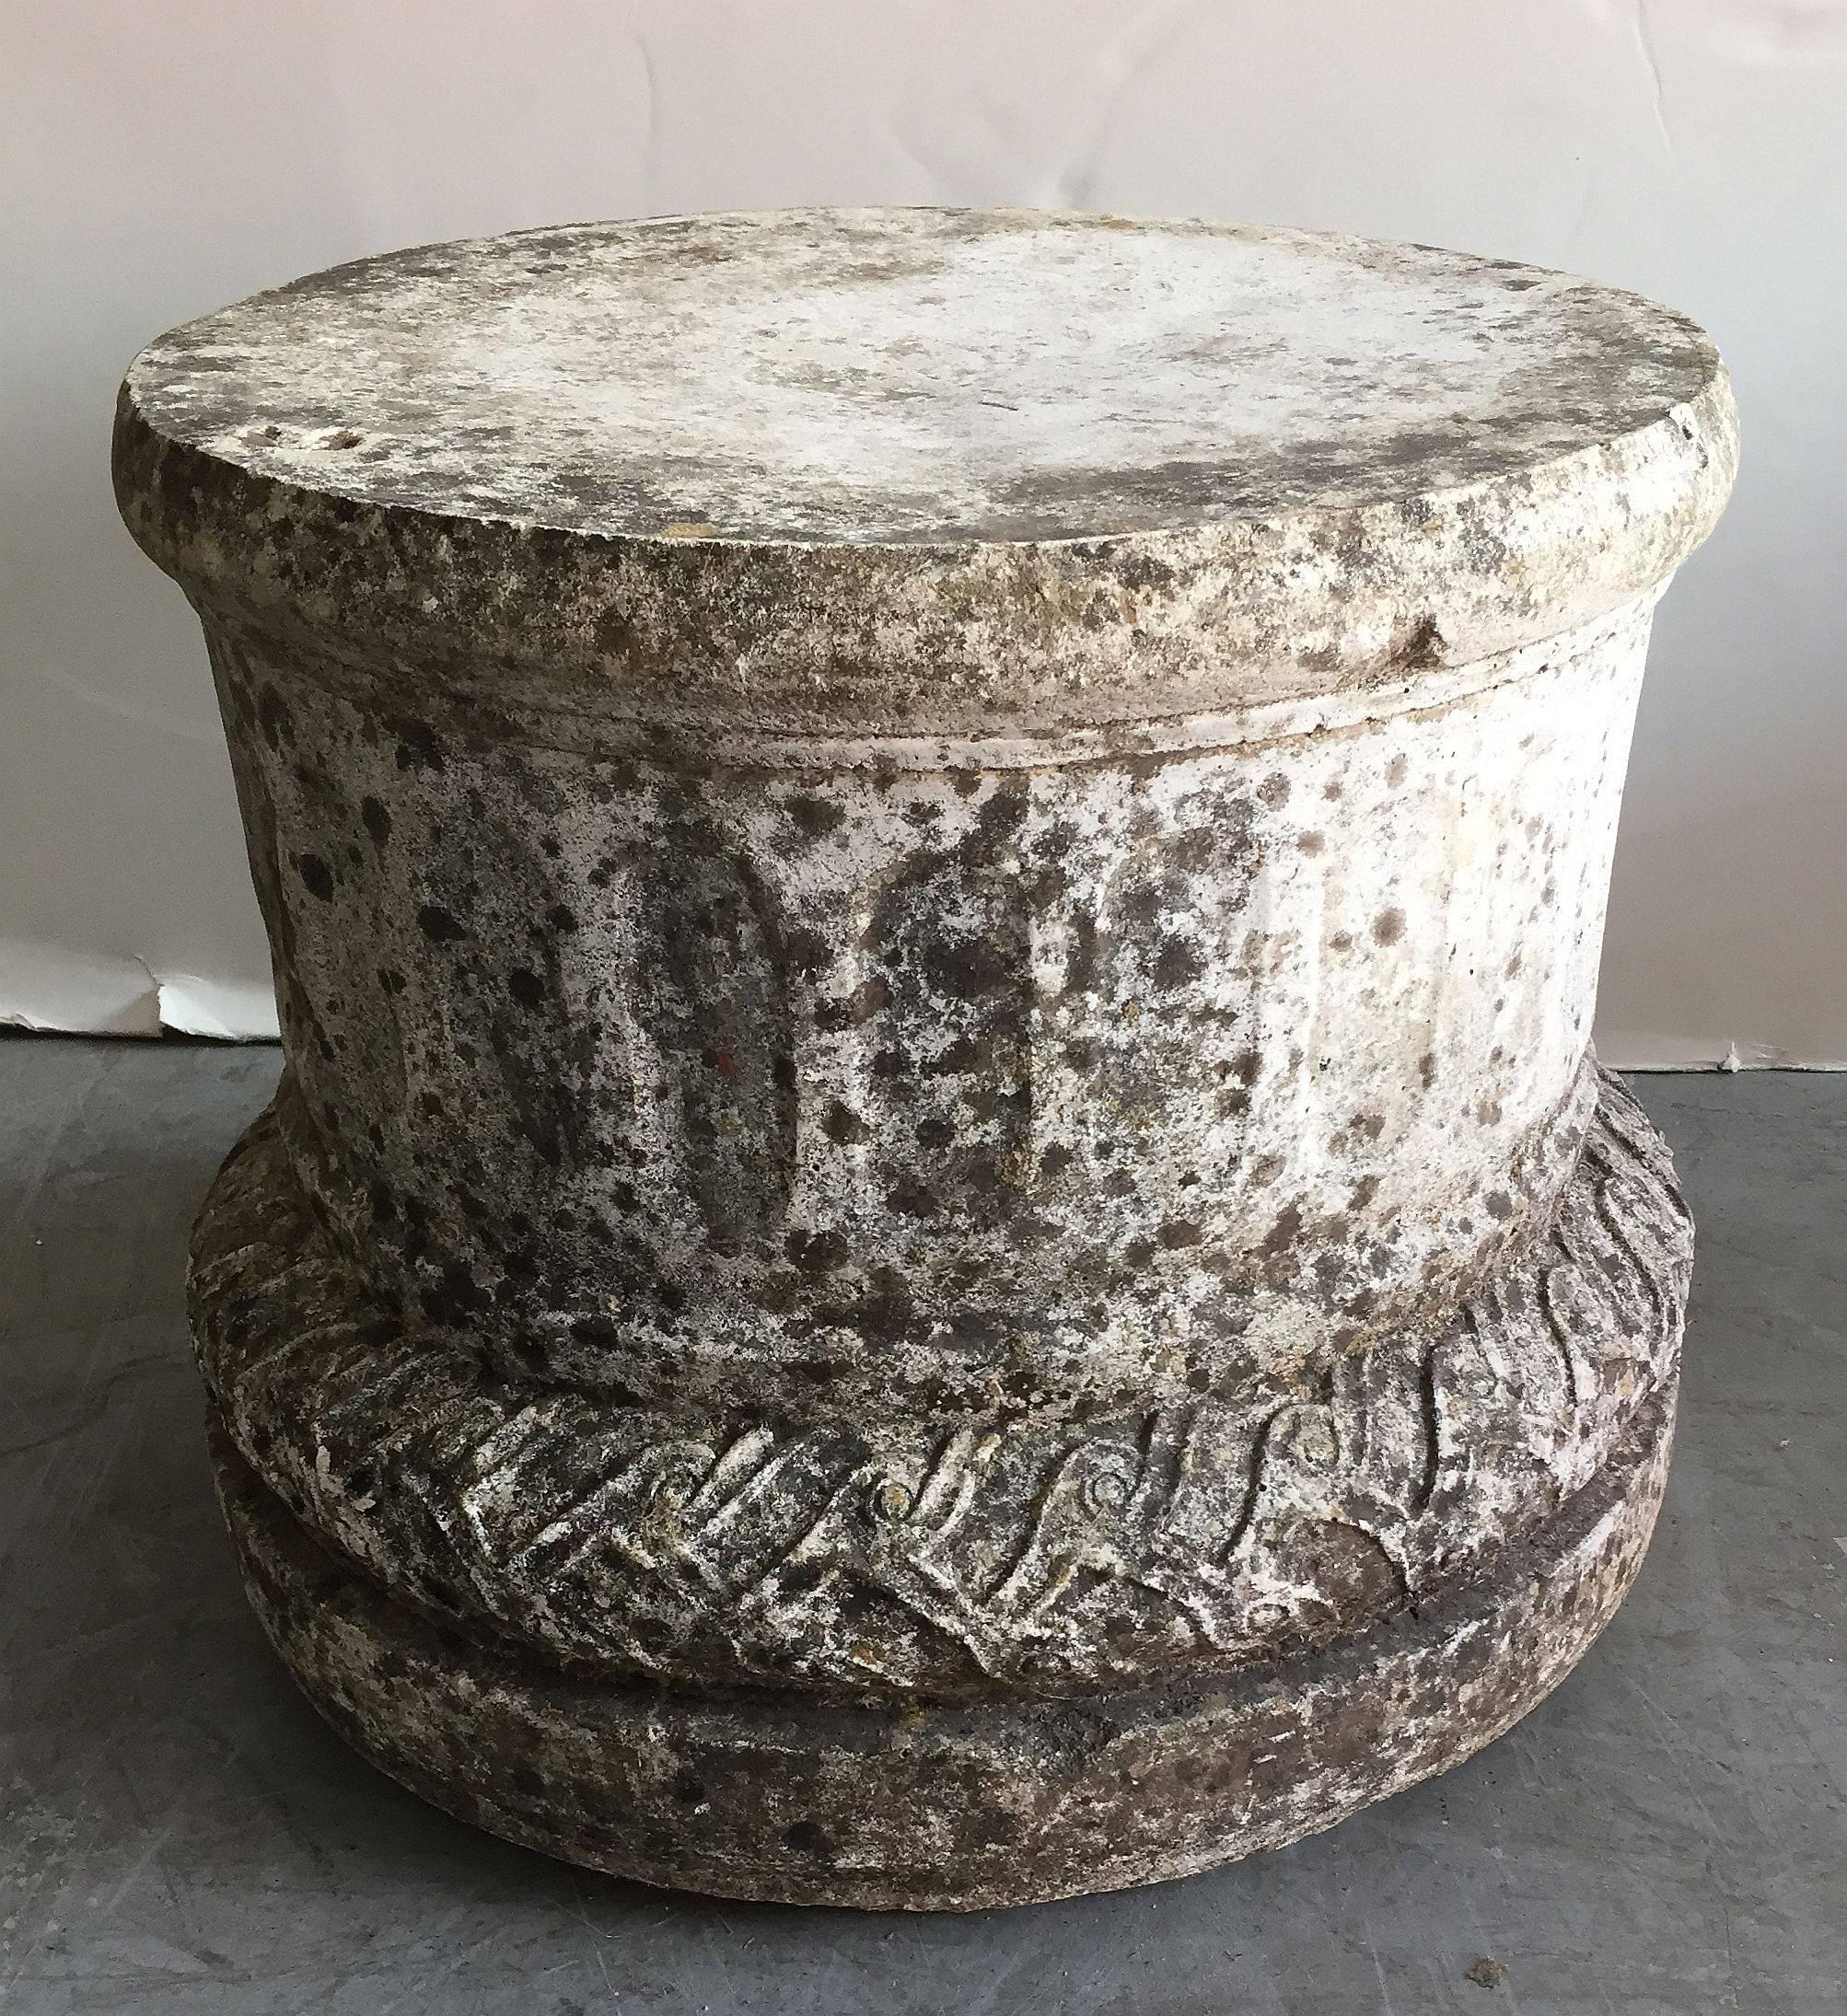 A classic English round or circular garden pedestal plinth of composition stone, with a column design and featuring fine detail around the base.

Measures: H 13 1/2